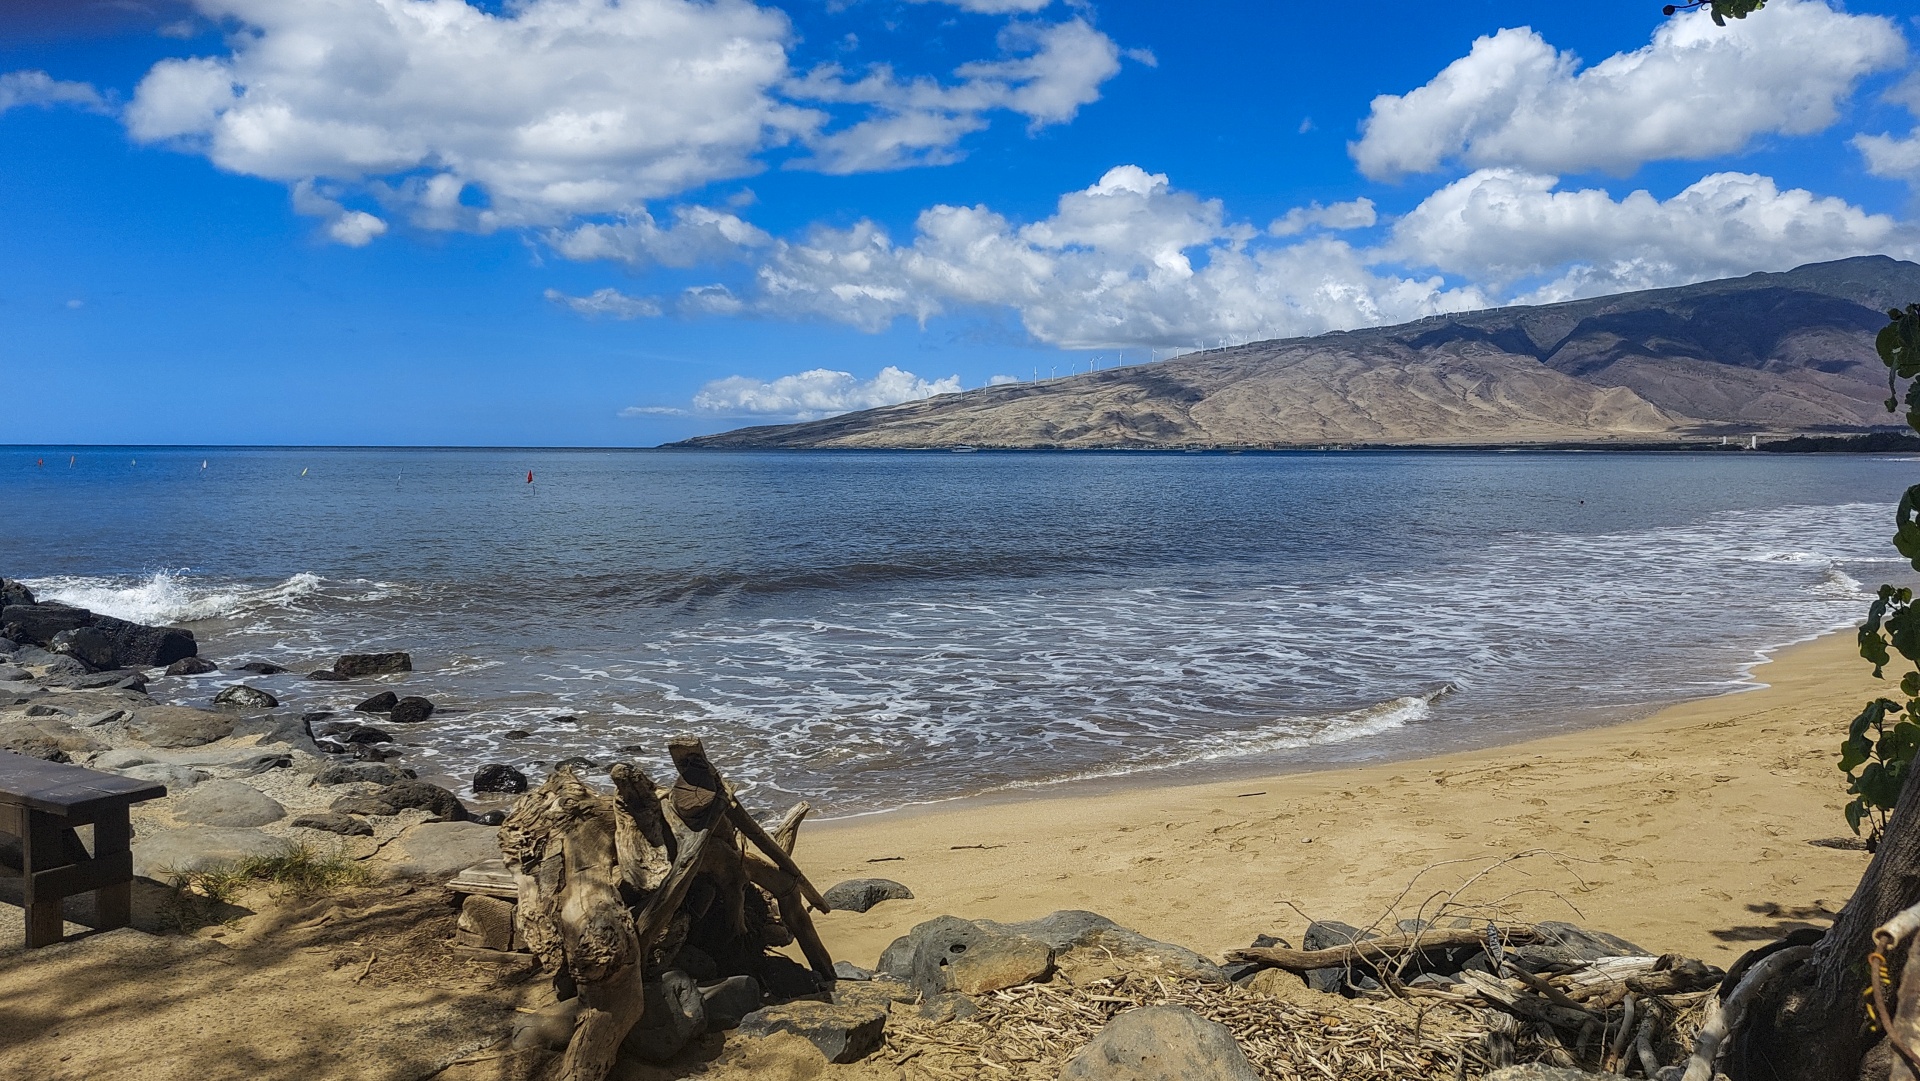 landscape view of the sand, sea, mountains, clouds and blue sky of Maui, Hawaii